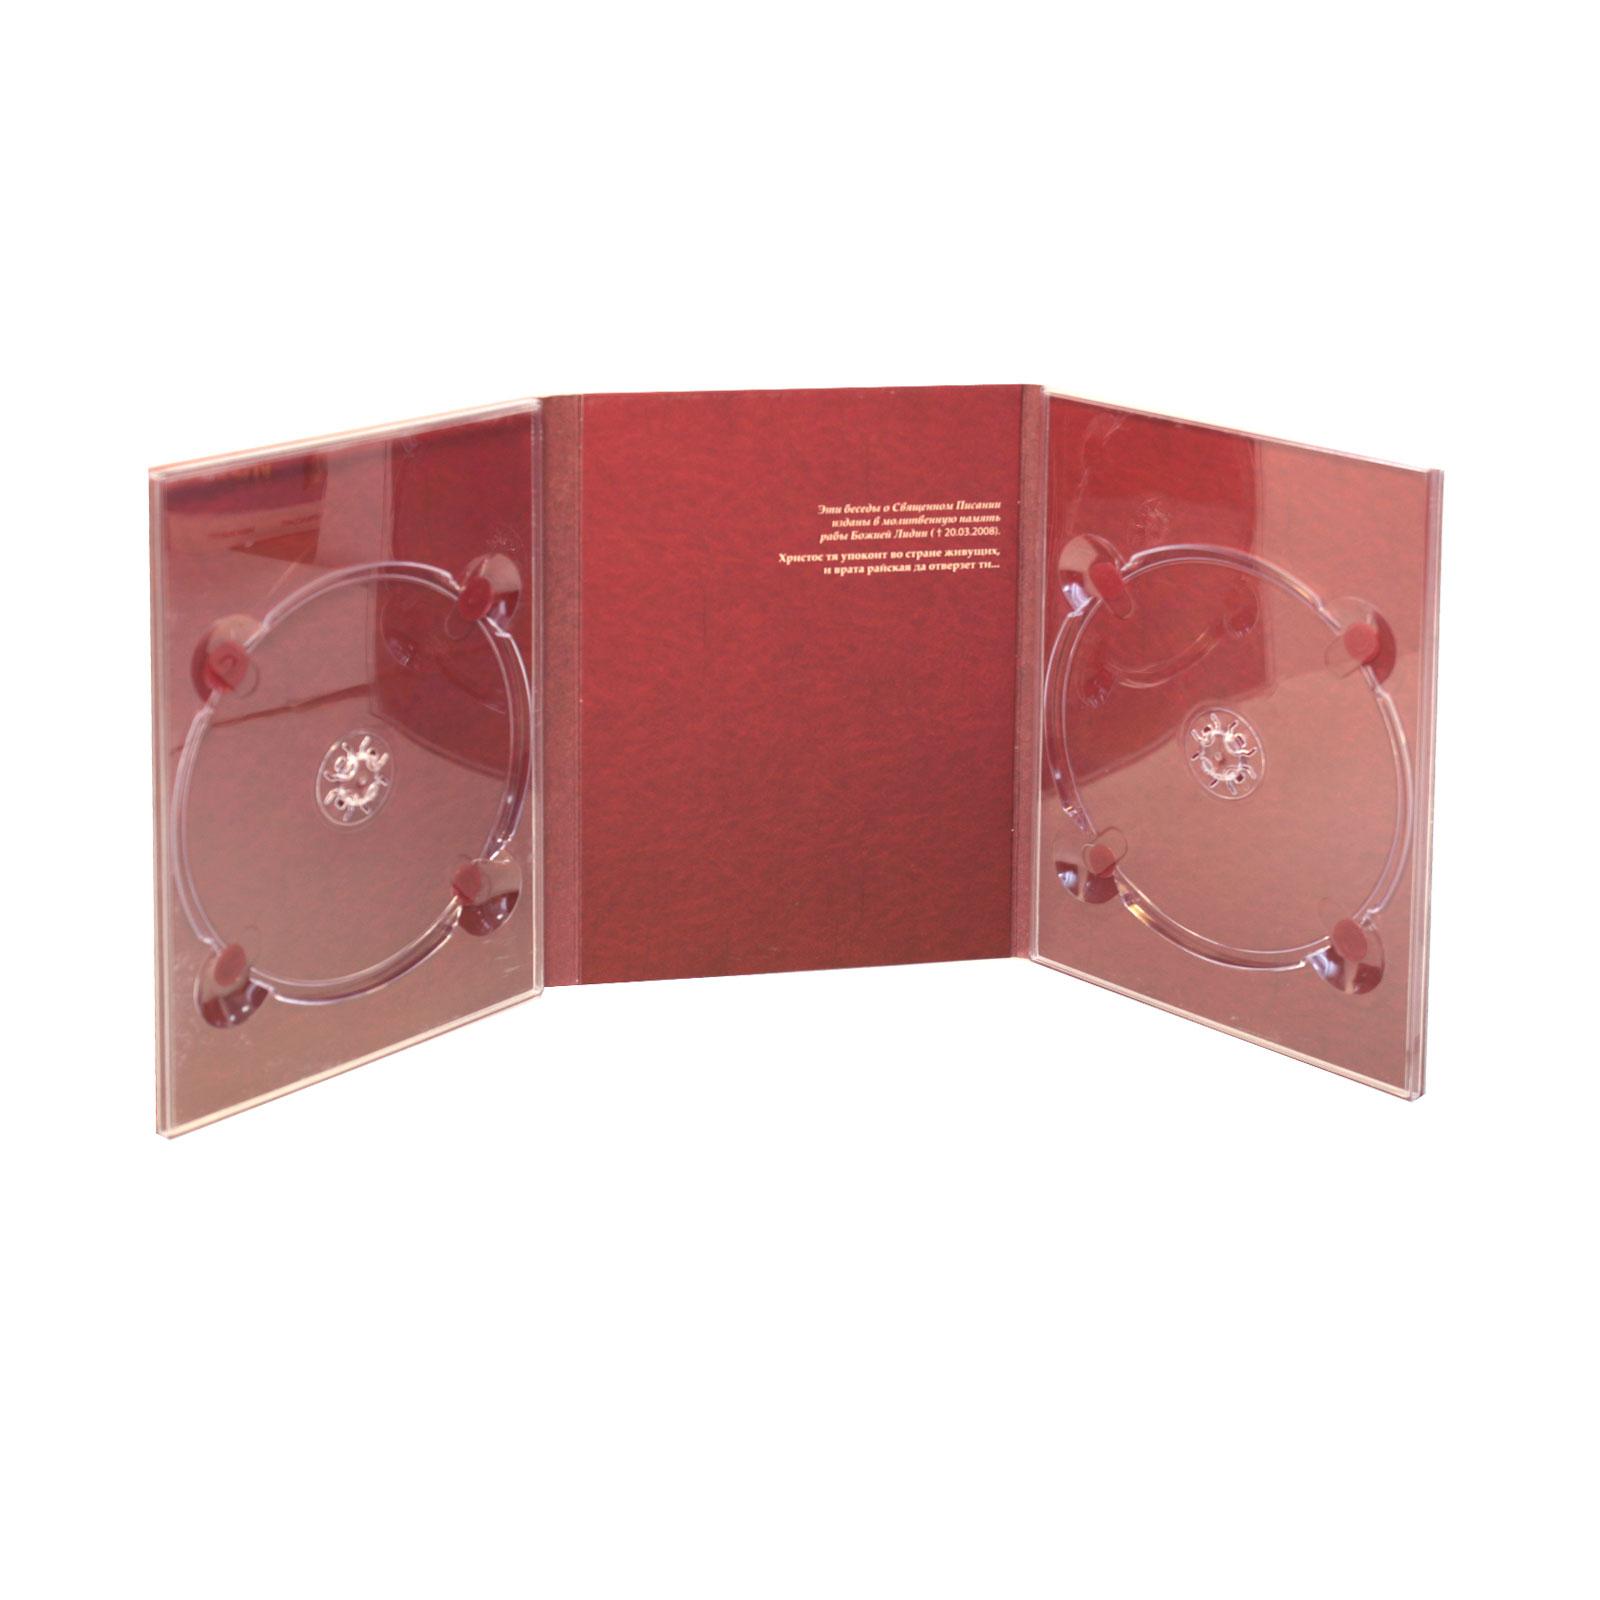 4 digifile cd panels